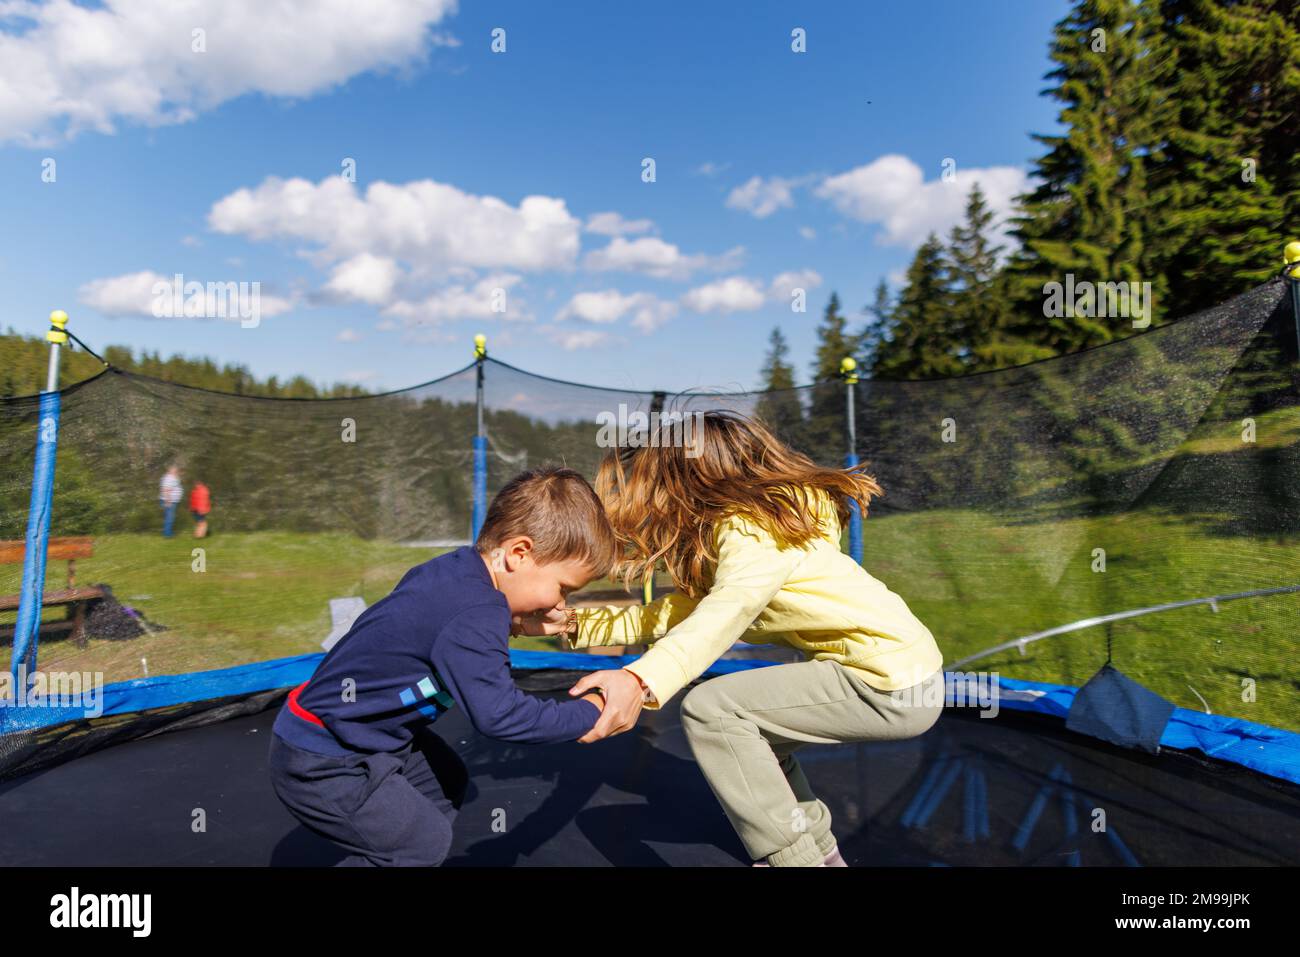 An older sister with flowing long hair in a yellow tracksuit and her little brother in a cute blue suit are jumping together on a netted trampoline in Stock Photo